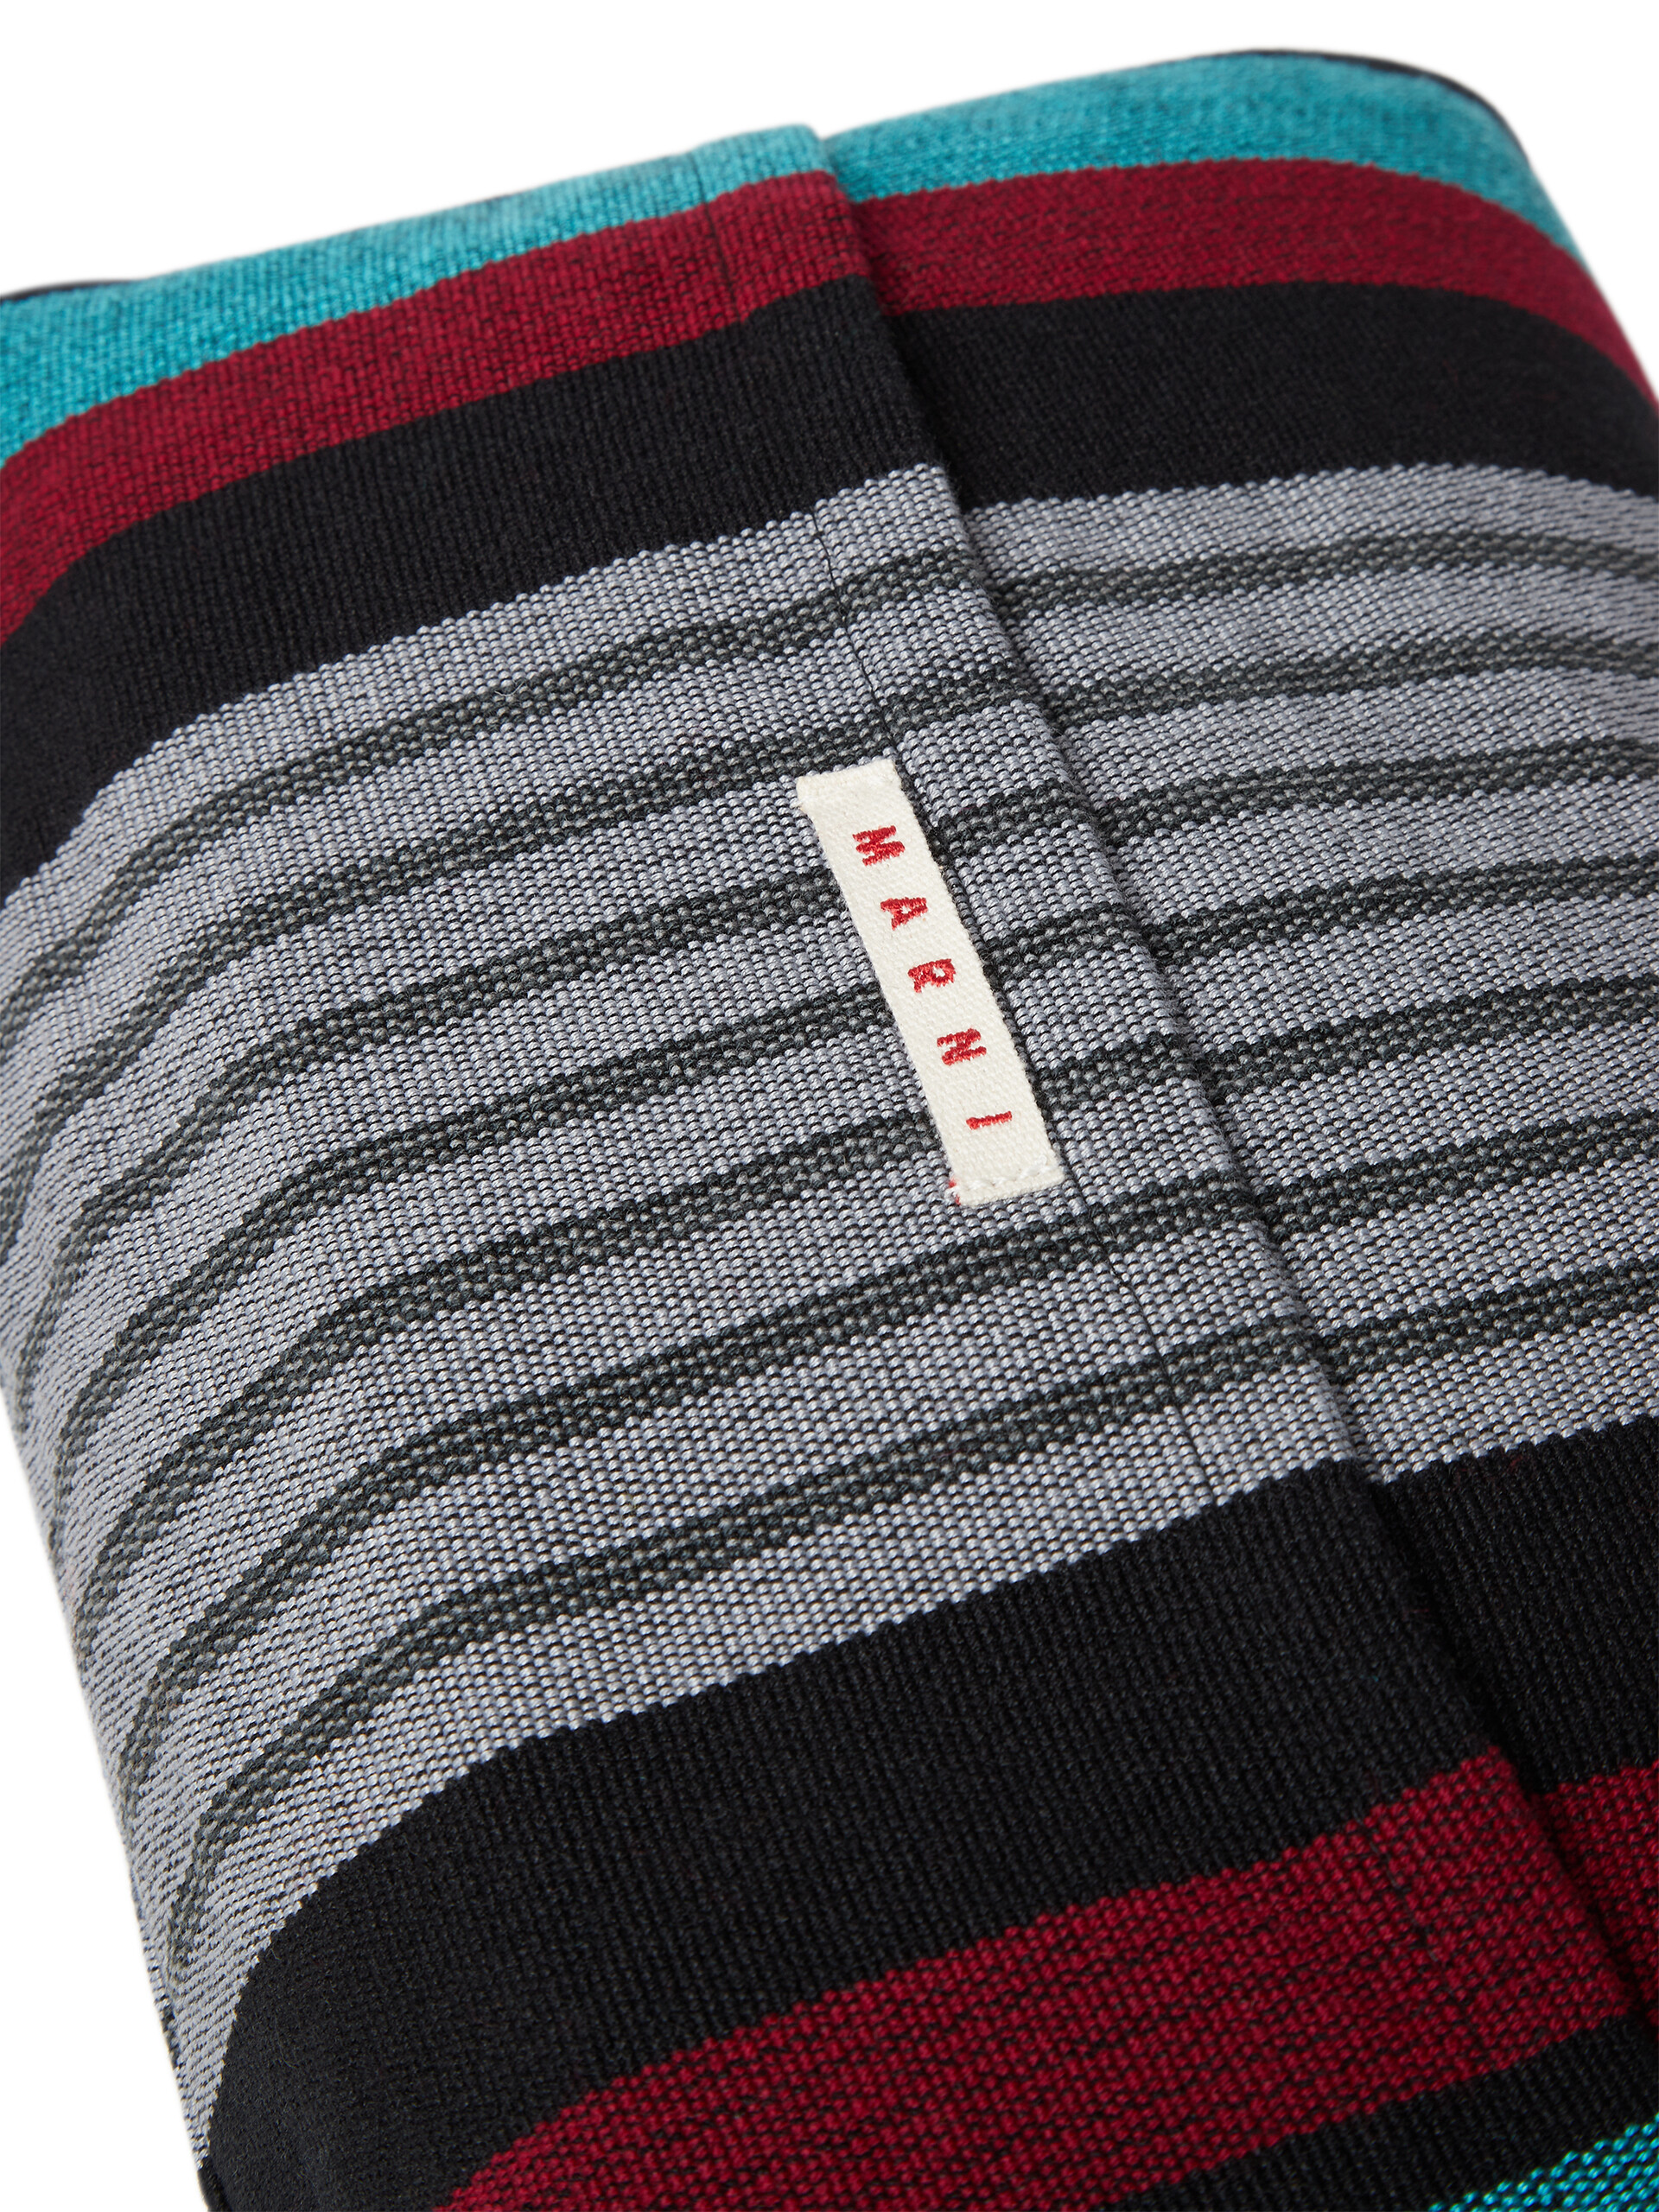 MARNI MARKET rectangular pillow cover in polyester with pale blue burgundy and black vertical stripes - Furniture - Image 3